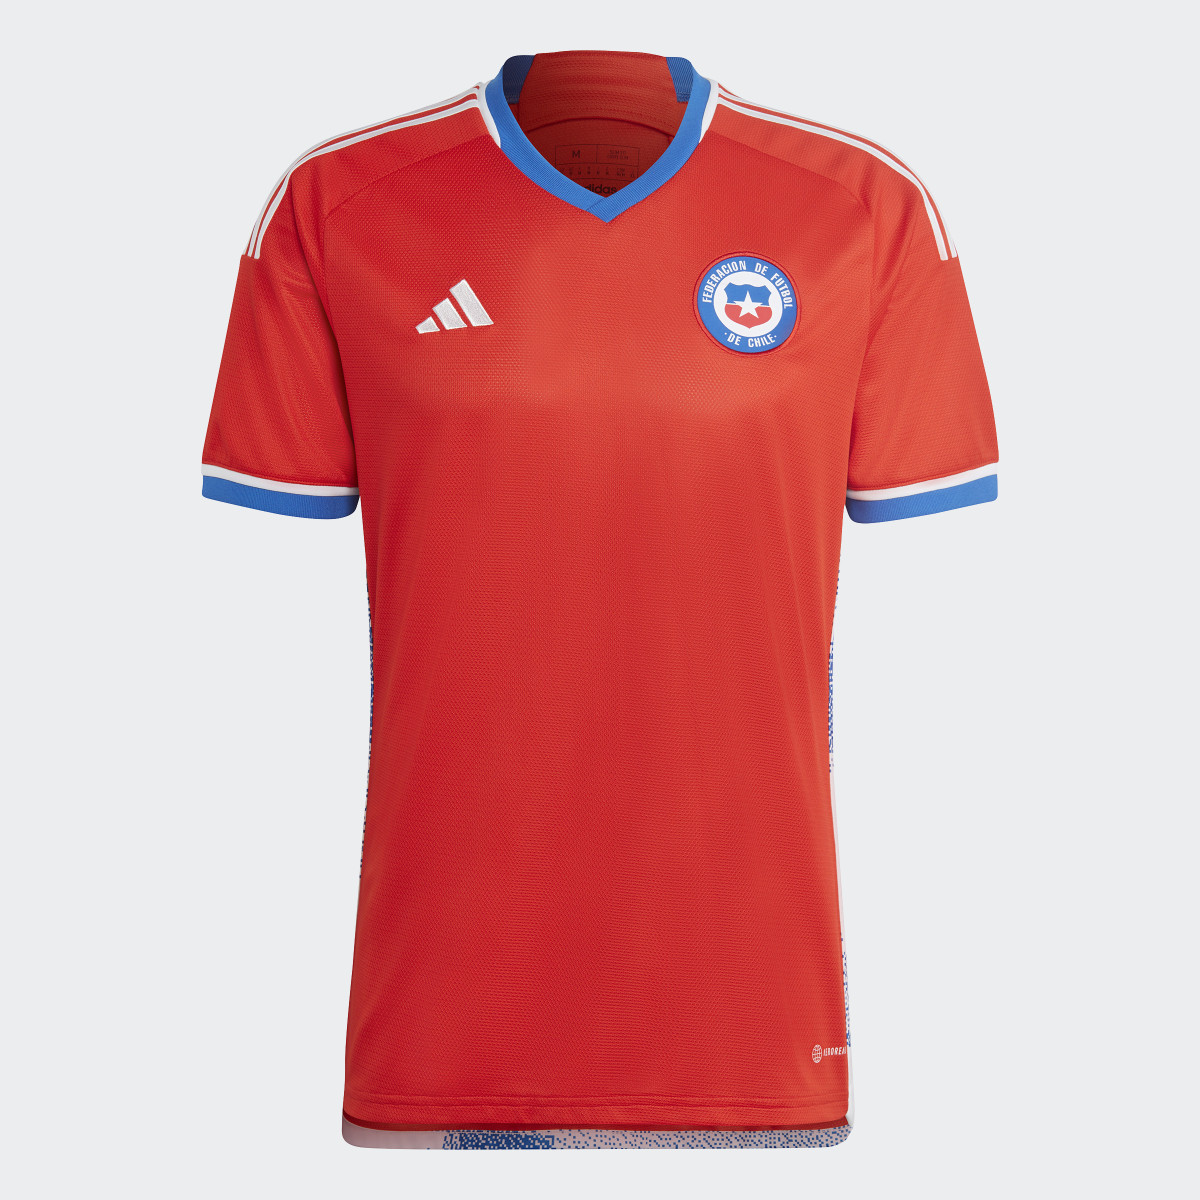 Adidas Chile 22 Home Jersey. 5